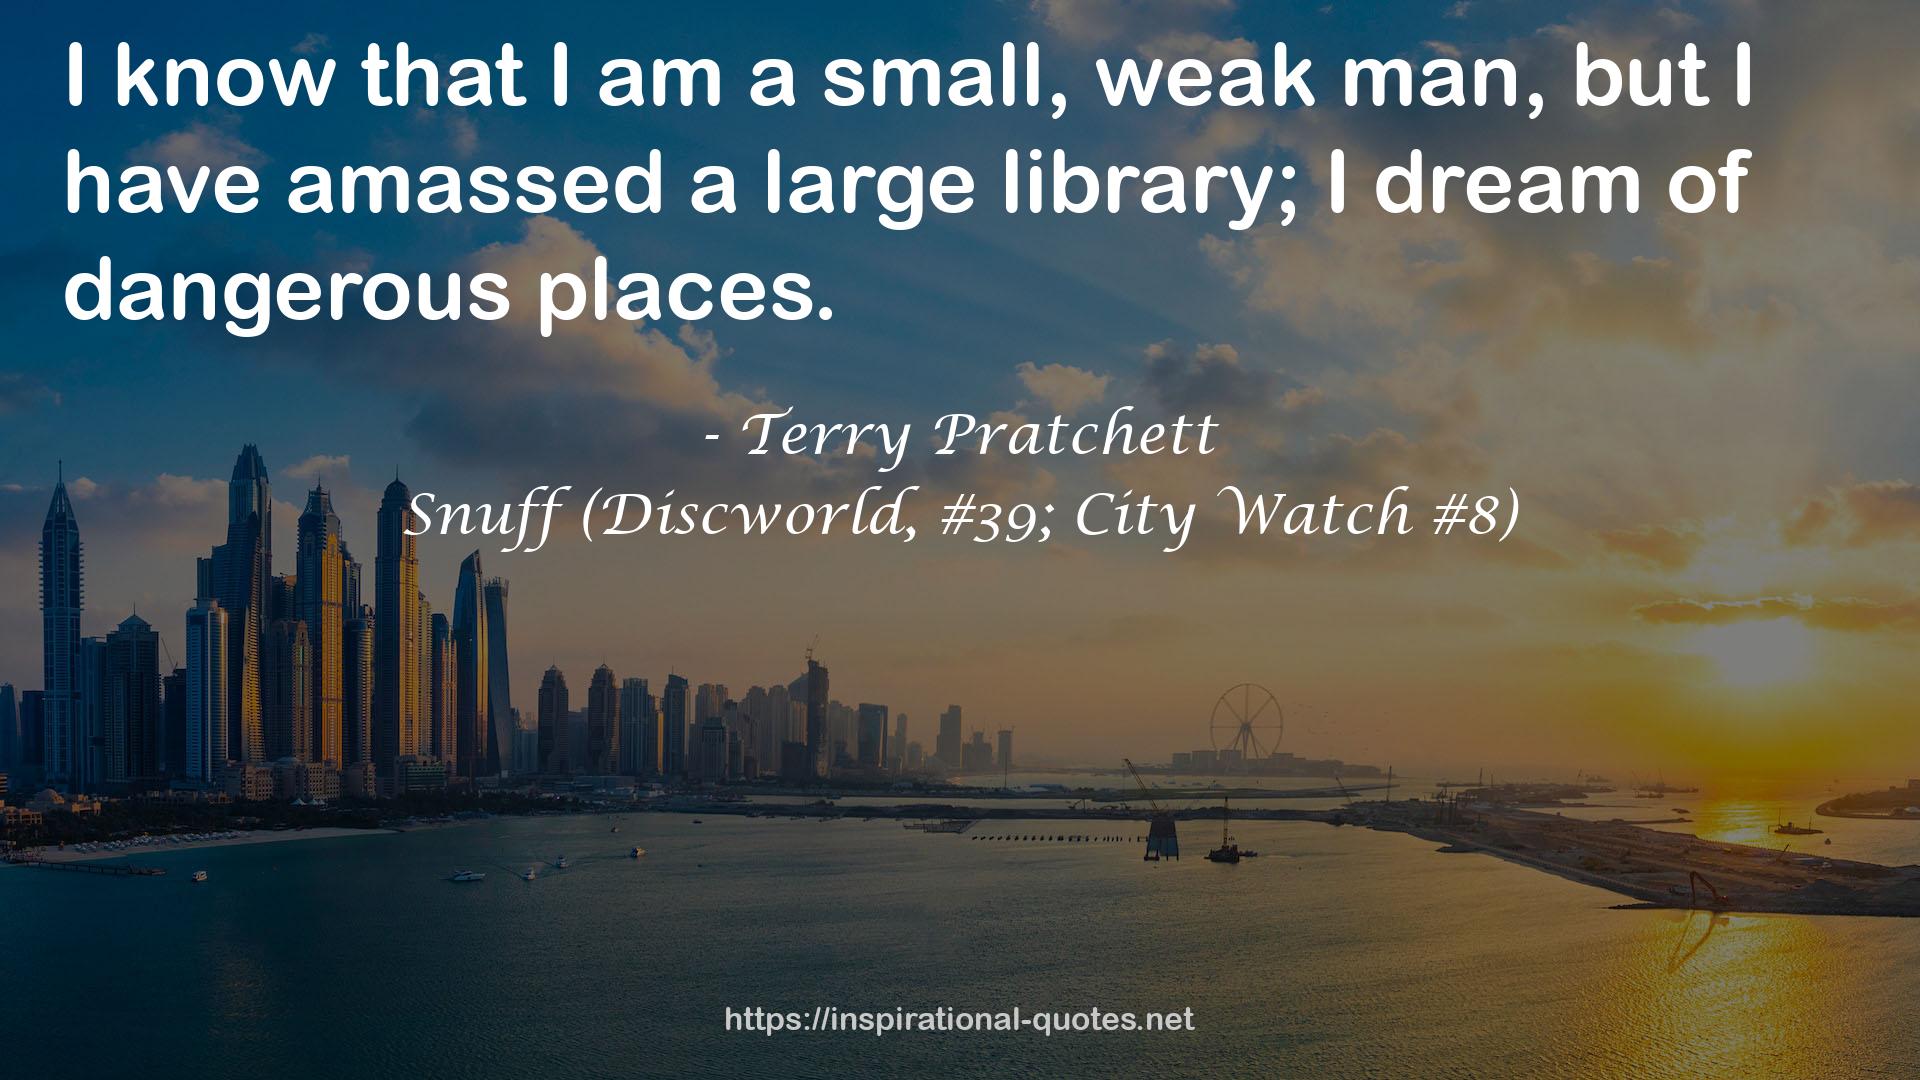 Snuff (Discworld, #39; City Watch #8) QUOTES